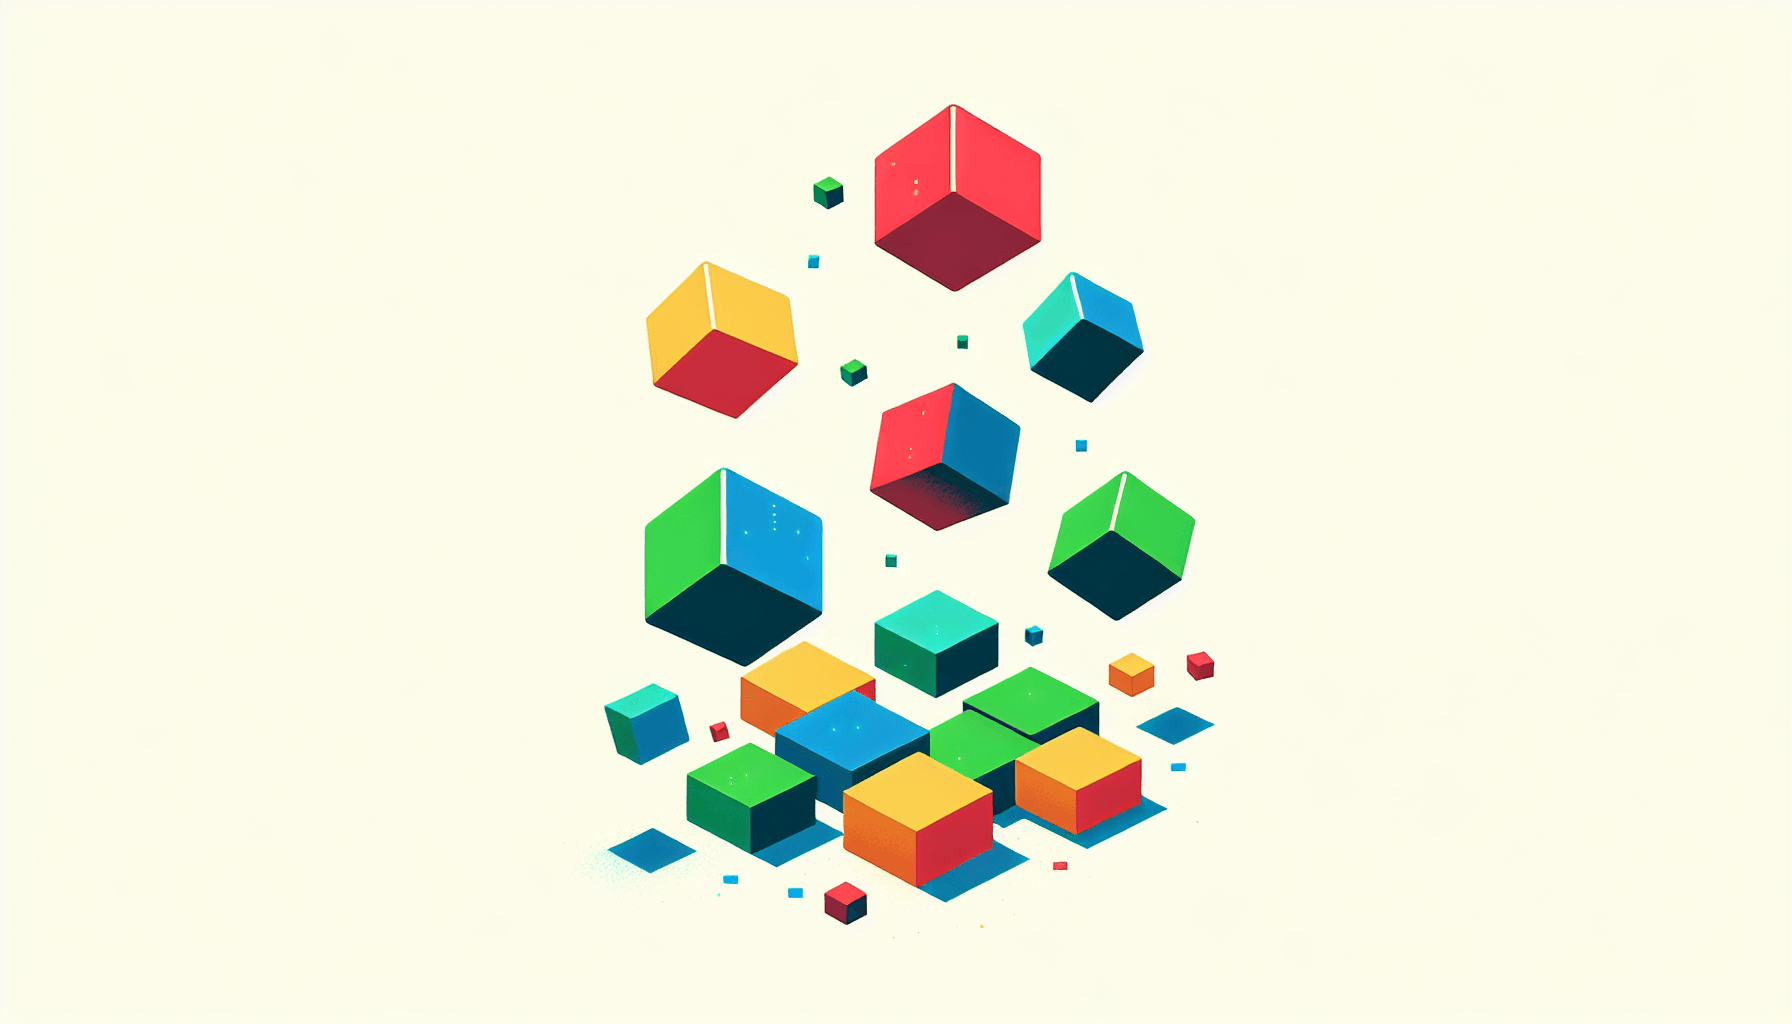 Falling blocks in flat illustration style and white background, red #f47574, green #88c7a8, yellow #fcc44b, and blue #645bc8 colors.